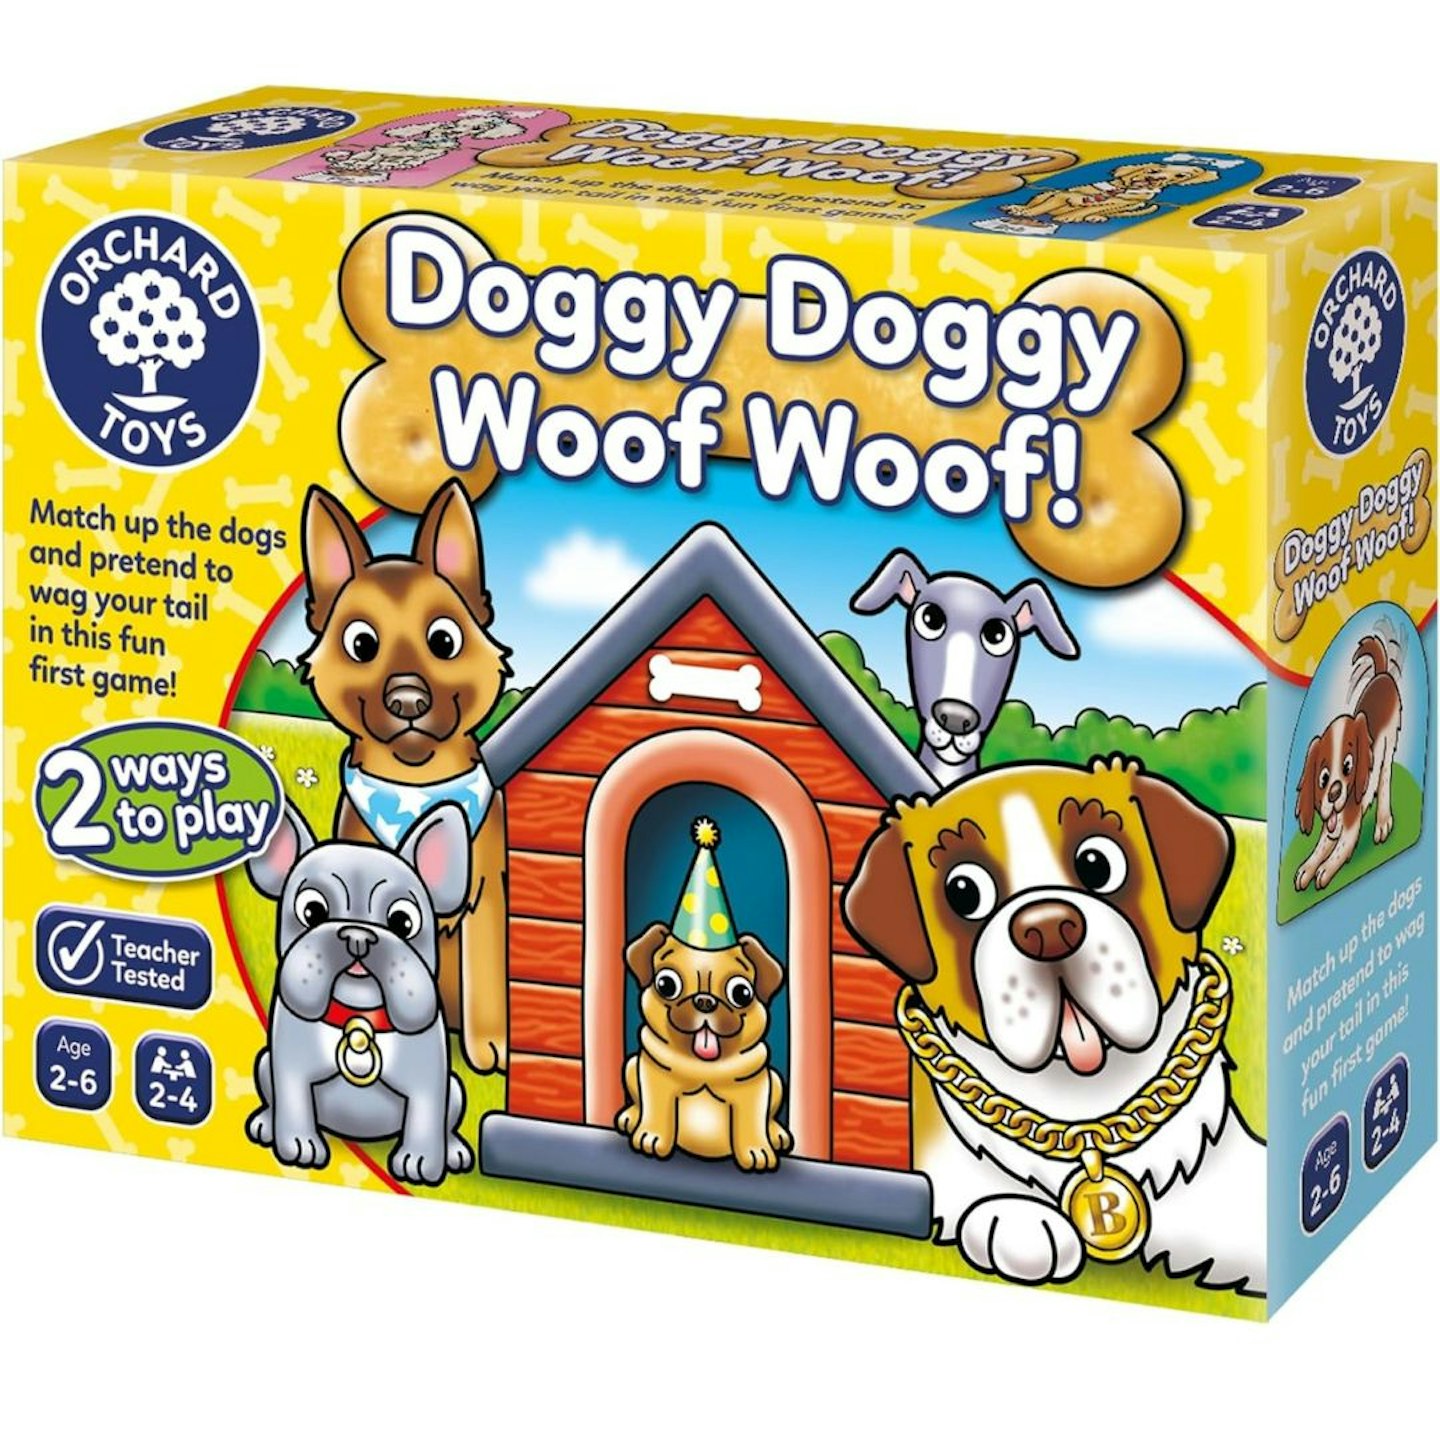  ORCHARD TOYS Doggy Doggy Woof Woof!